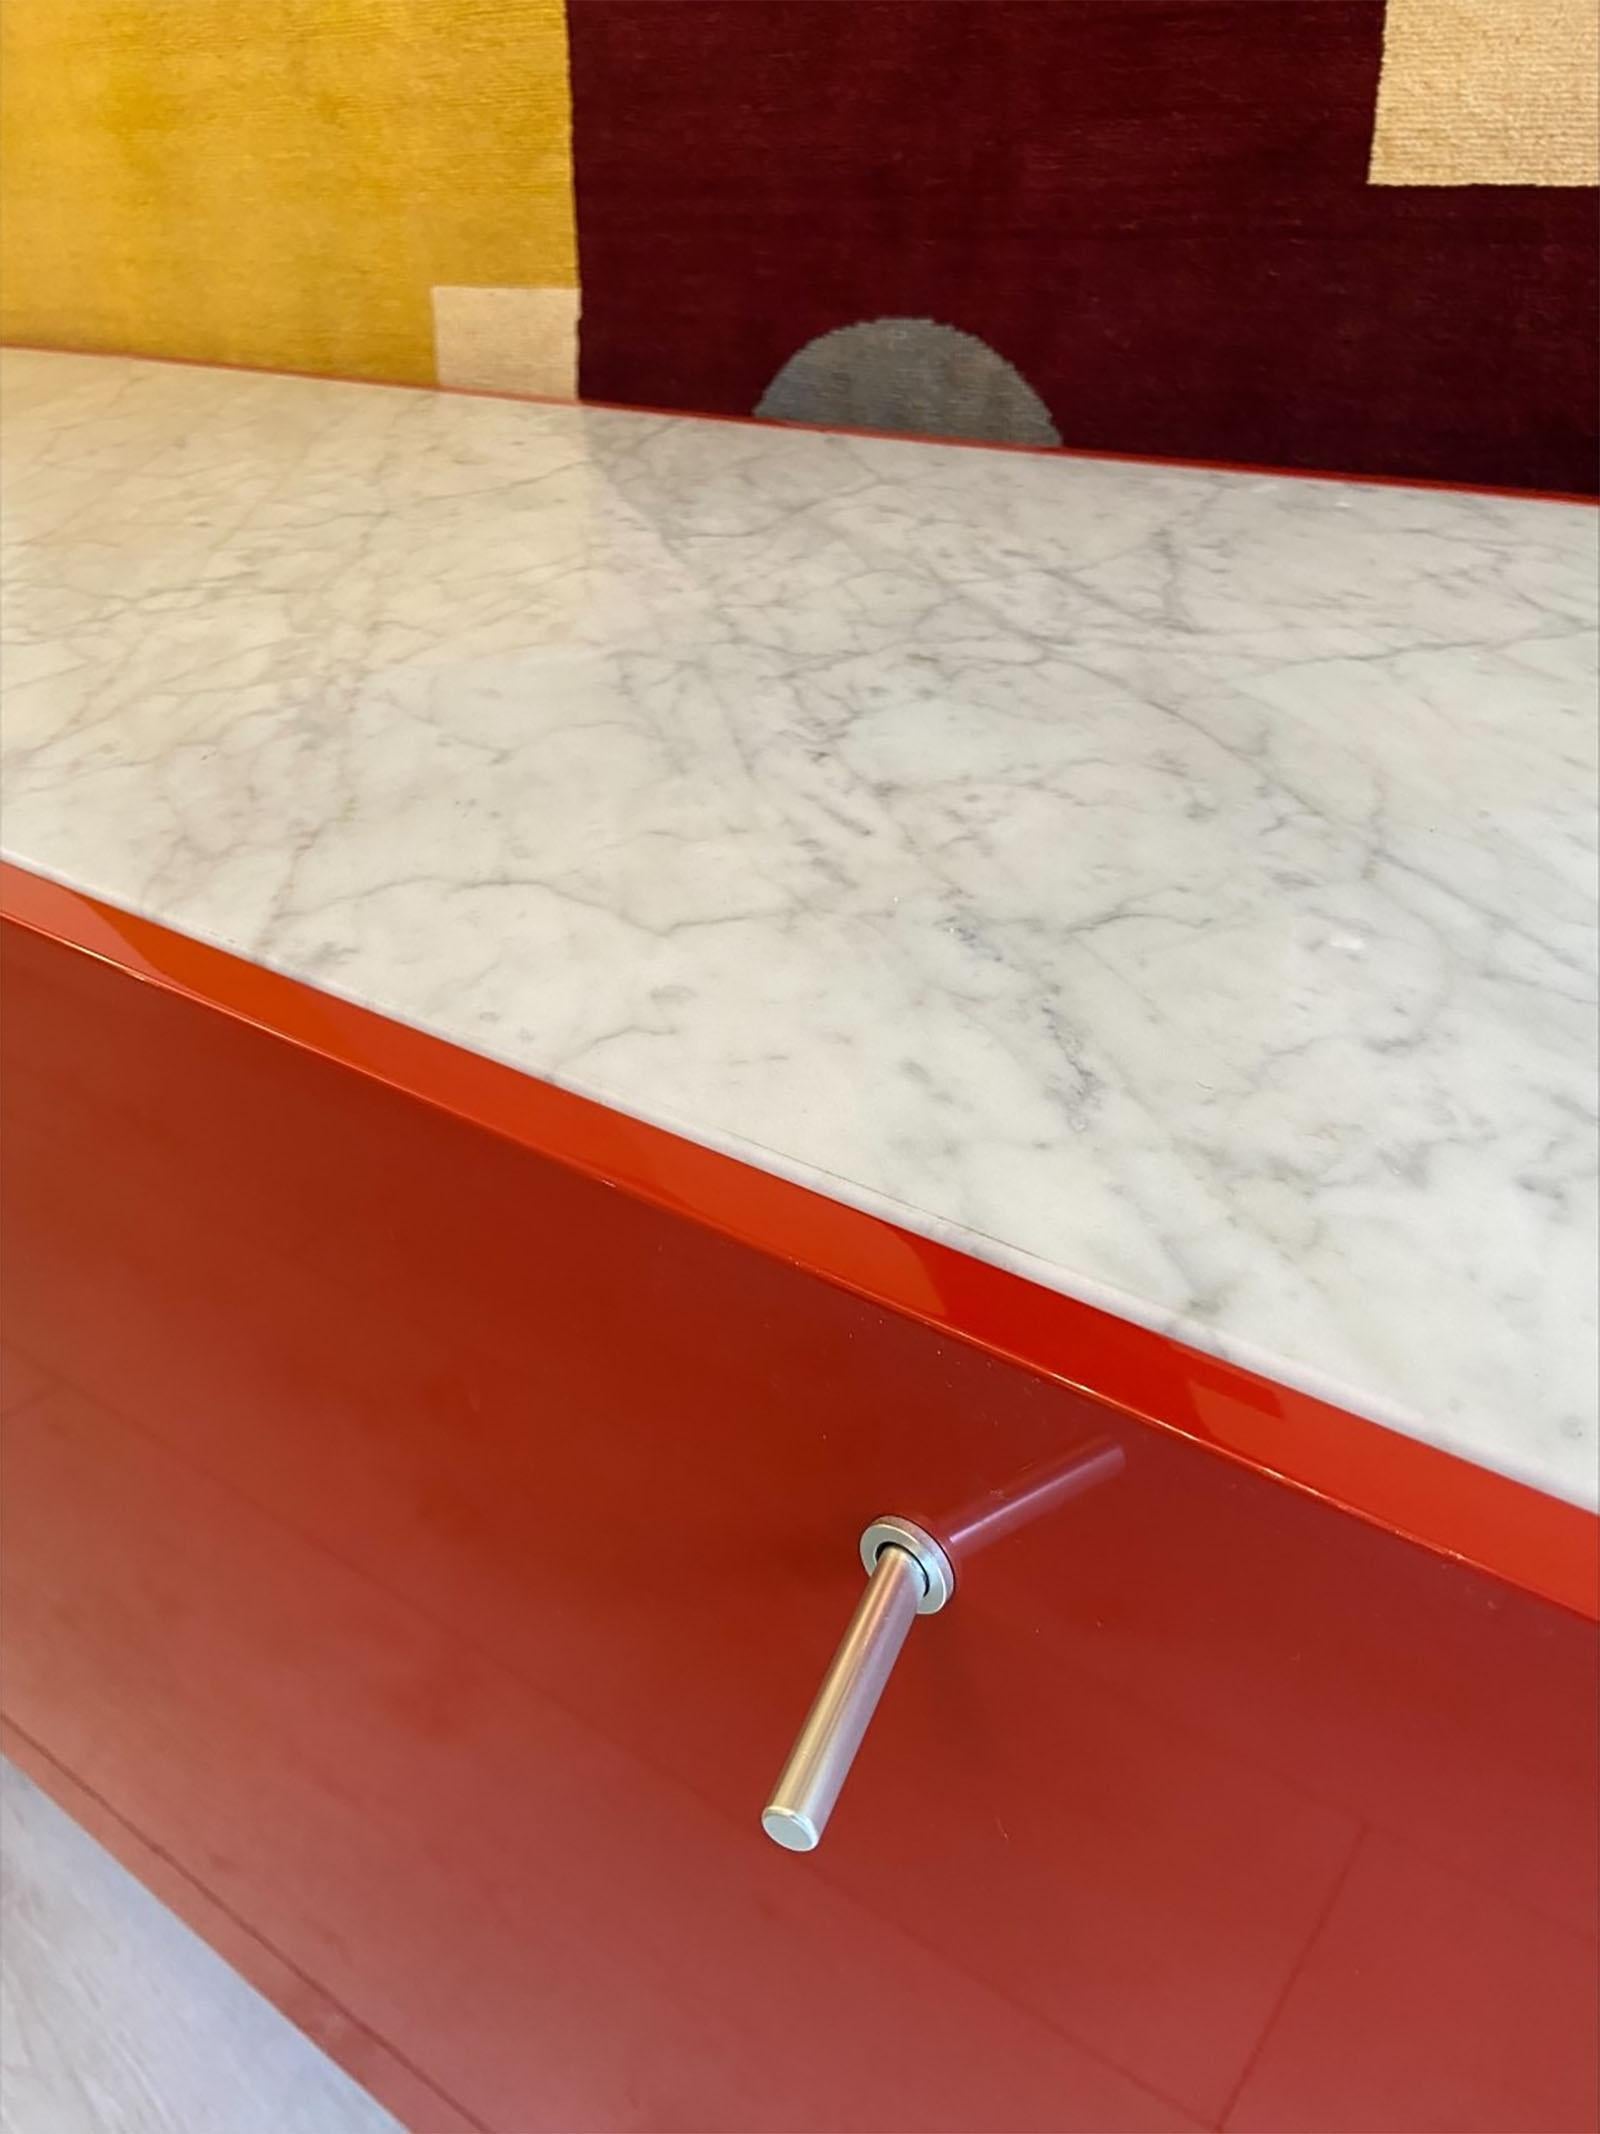 Sideboard - Florence Knoll

Cassina edition

Marble and orange lacquered wood

Perfect condition.

Circa 2002

W80xD60xH66 cm

Reference : 4010

5 900,00€